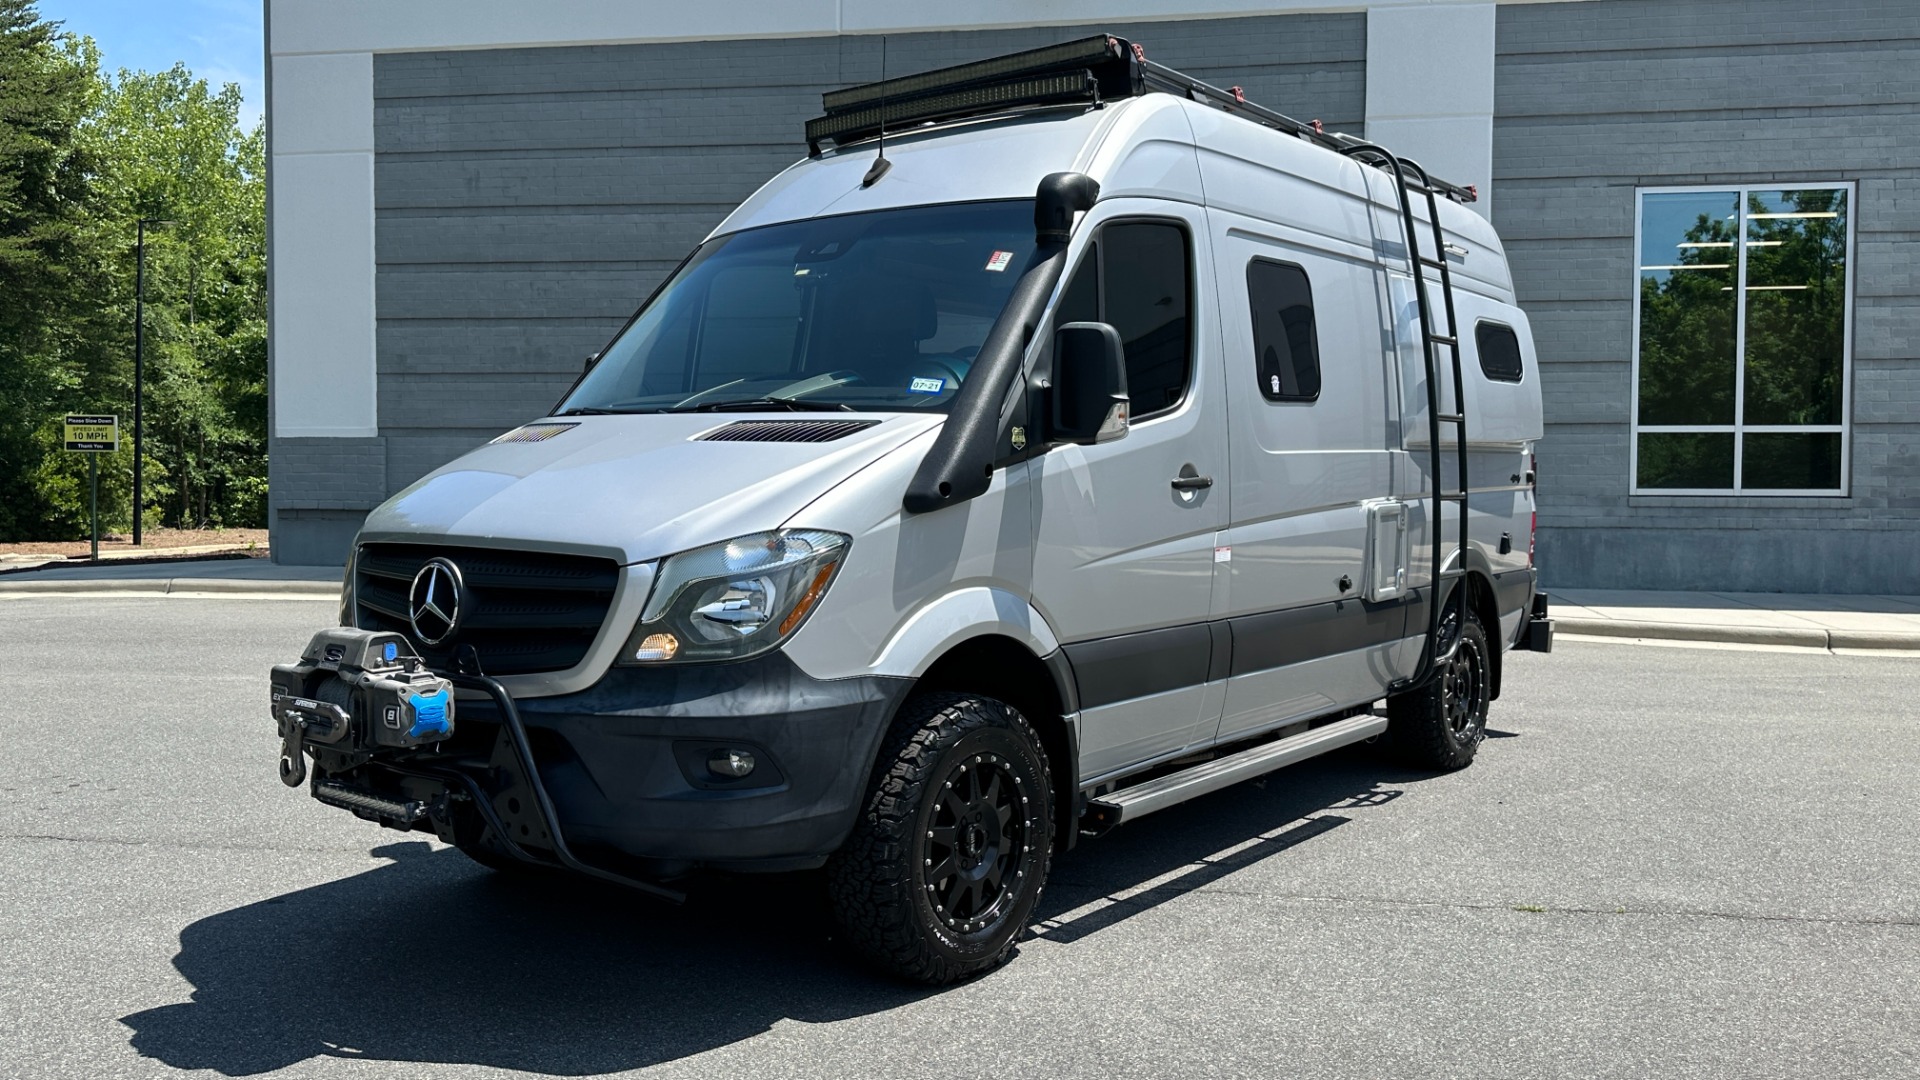 Used 2018 Mercedes-Benz Sprinter Winnebego OVERLANDER / CONVERSION SPRINTER / 4X4 / KITCHEN / BATHROOM / AIR / AWNING for sale $129,000 at Formula Imports in Charlotte NC 28227 1